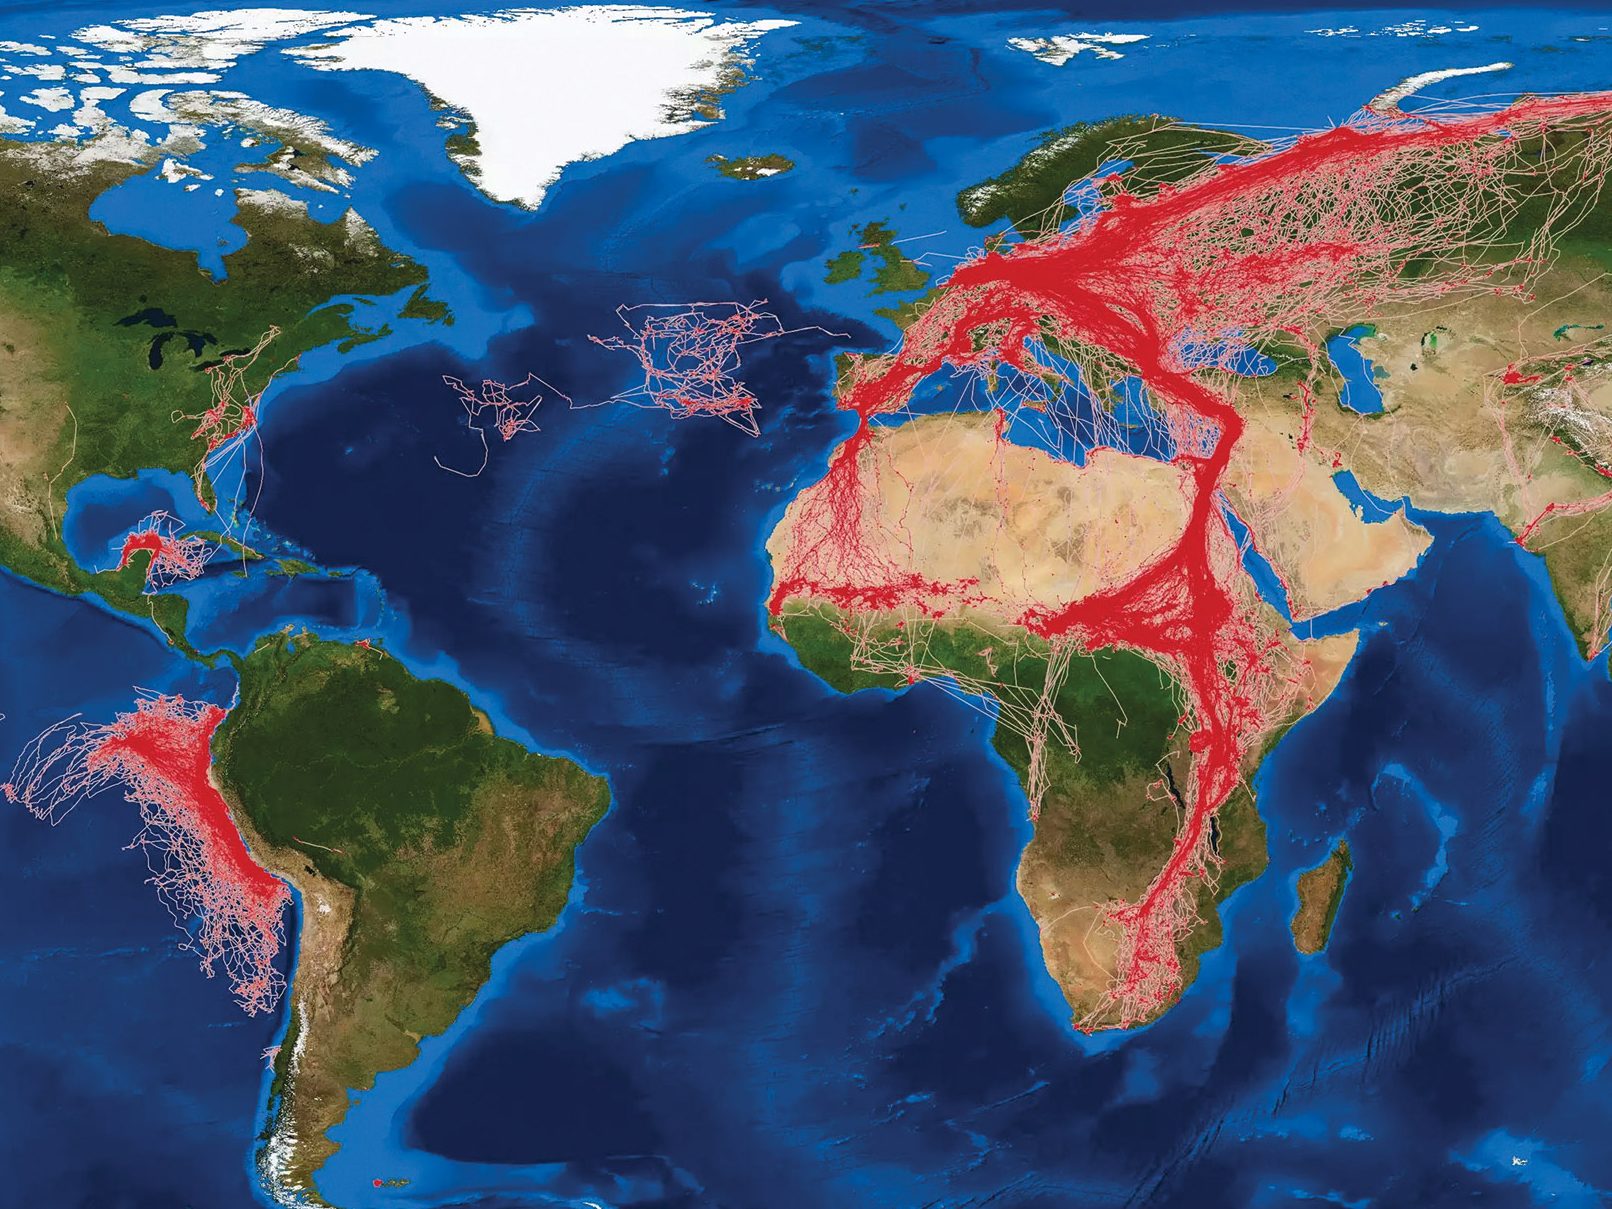 map of the earth with flight pattern of tracked birds shown in red